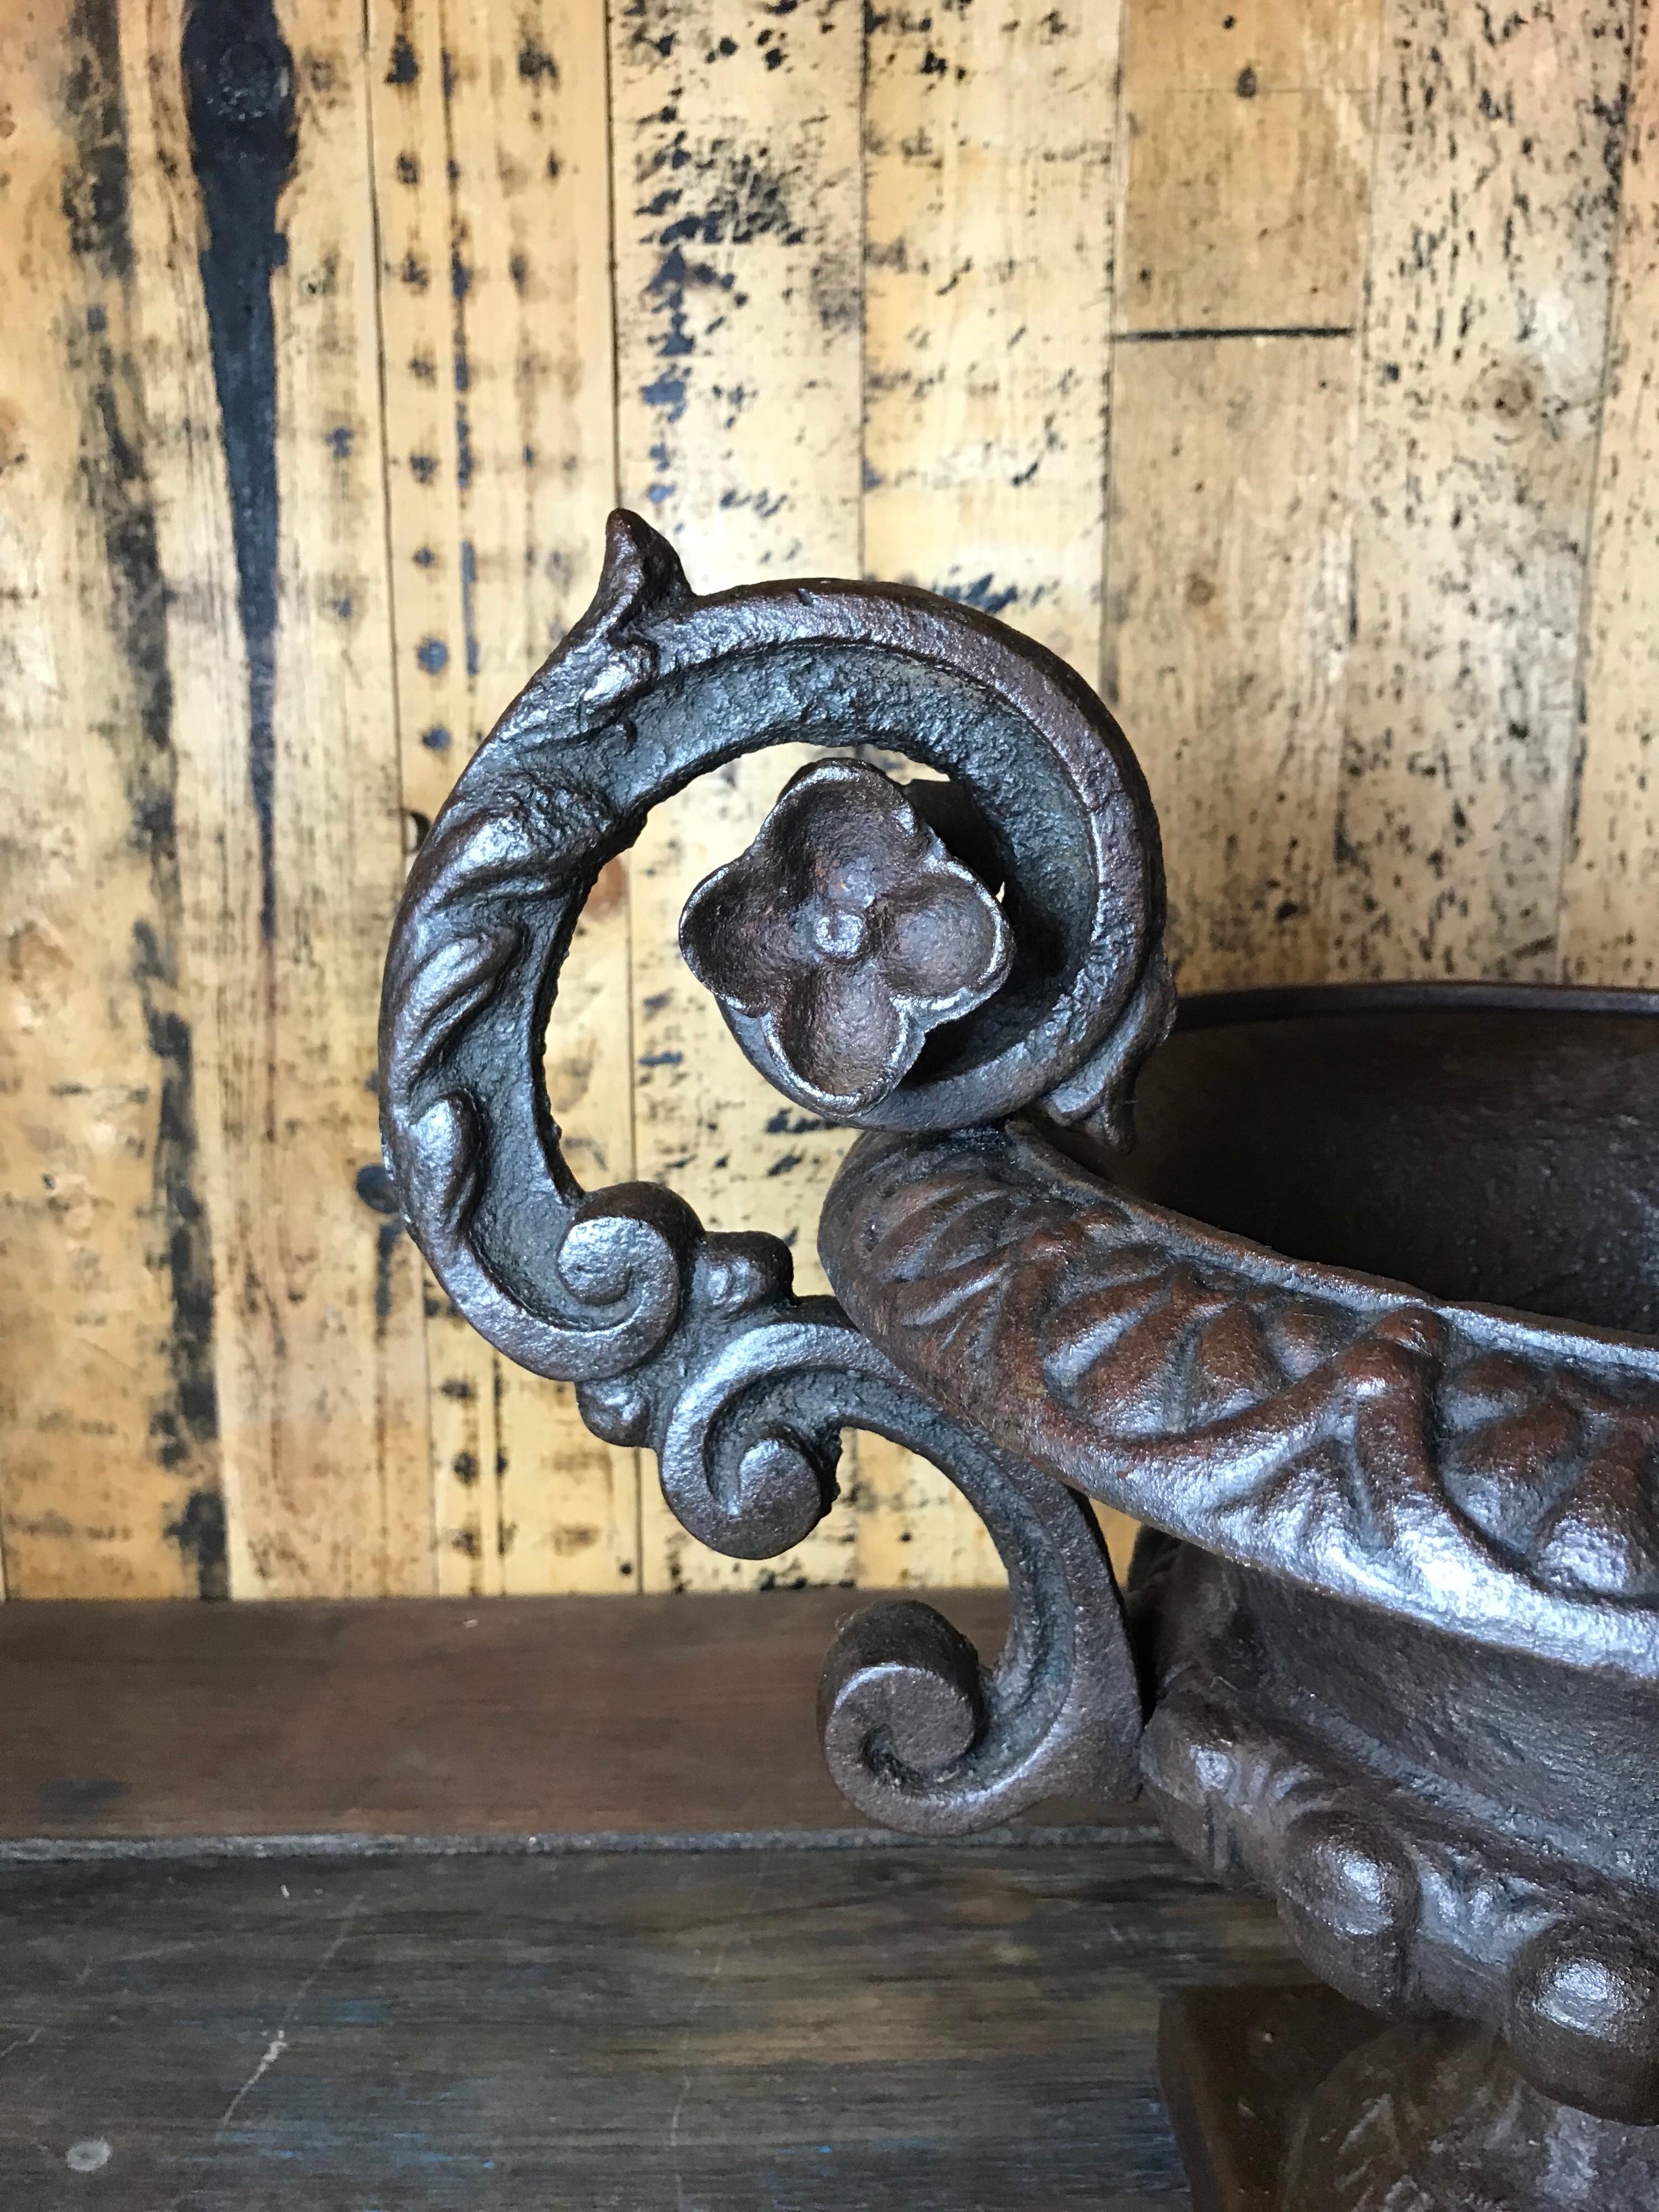 Beautiful French antique cast iron jardinière.
The most gorgeous deep rich patina to the iron and with no cracks.
Perfect size for placing on a table or sideboard.
Simply a pleasure to look at and to own.
Great English country house style. 